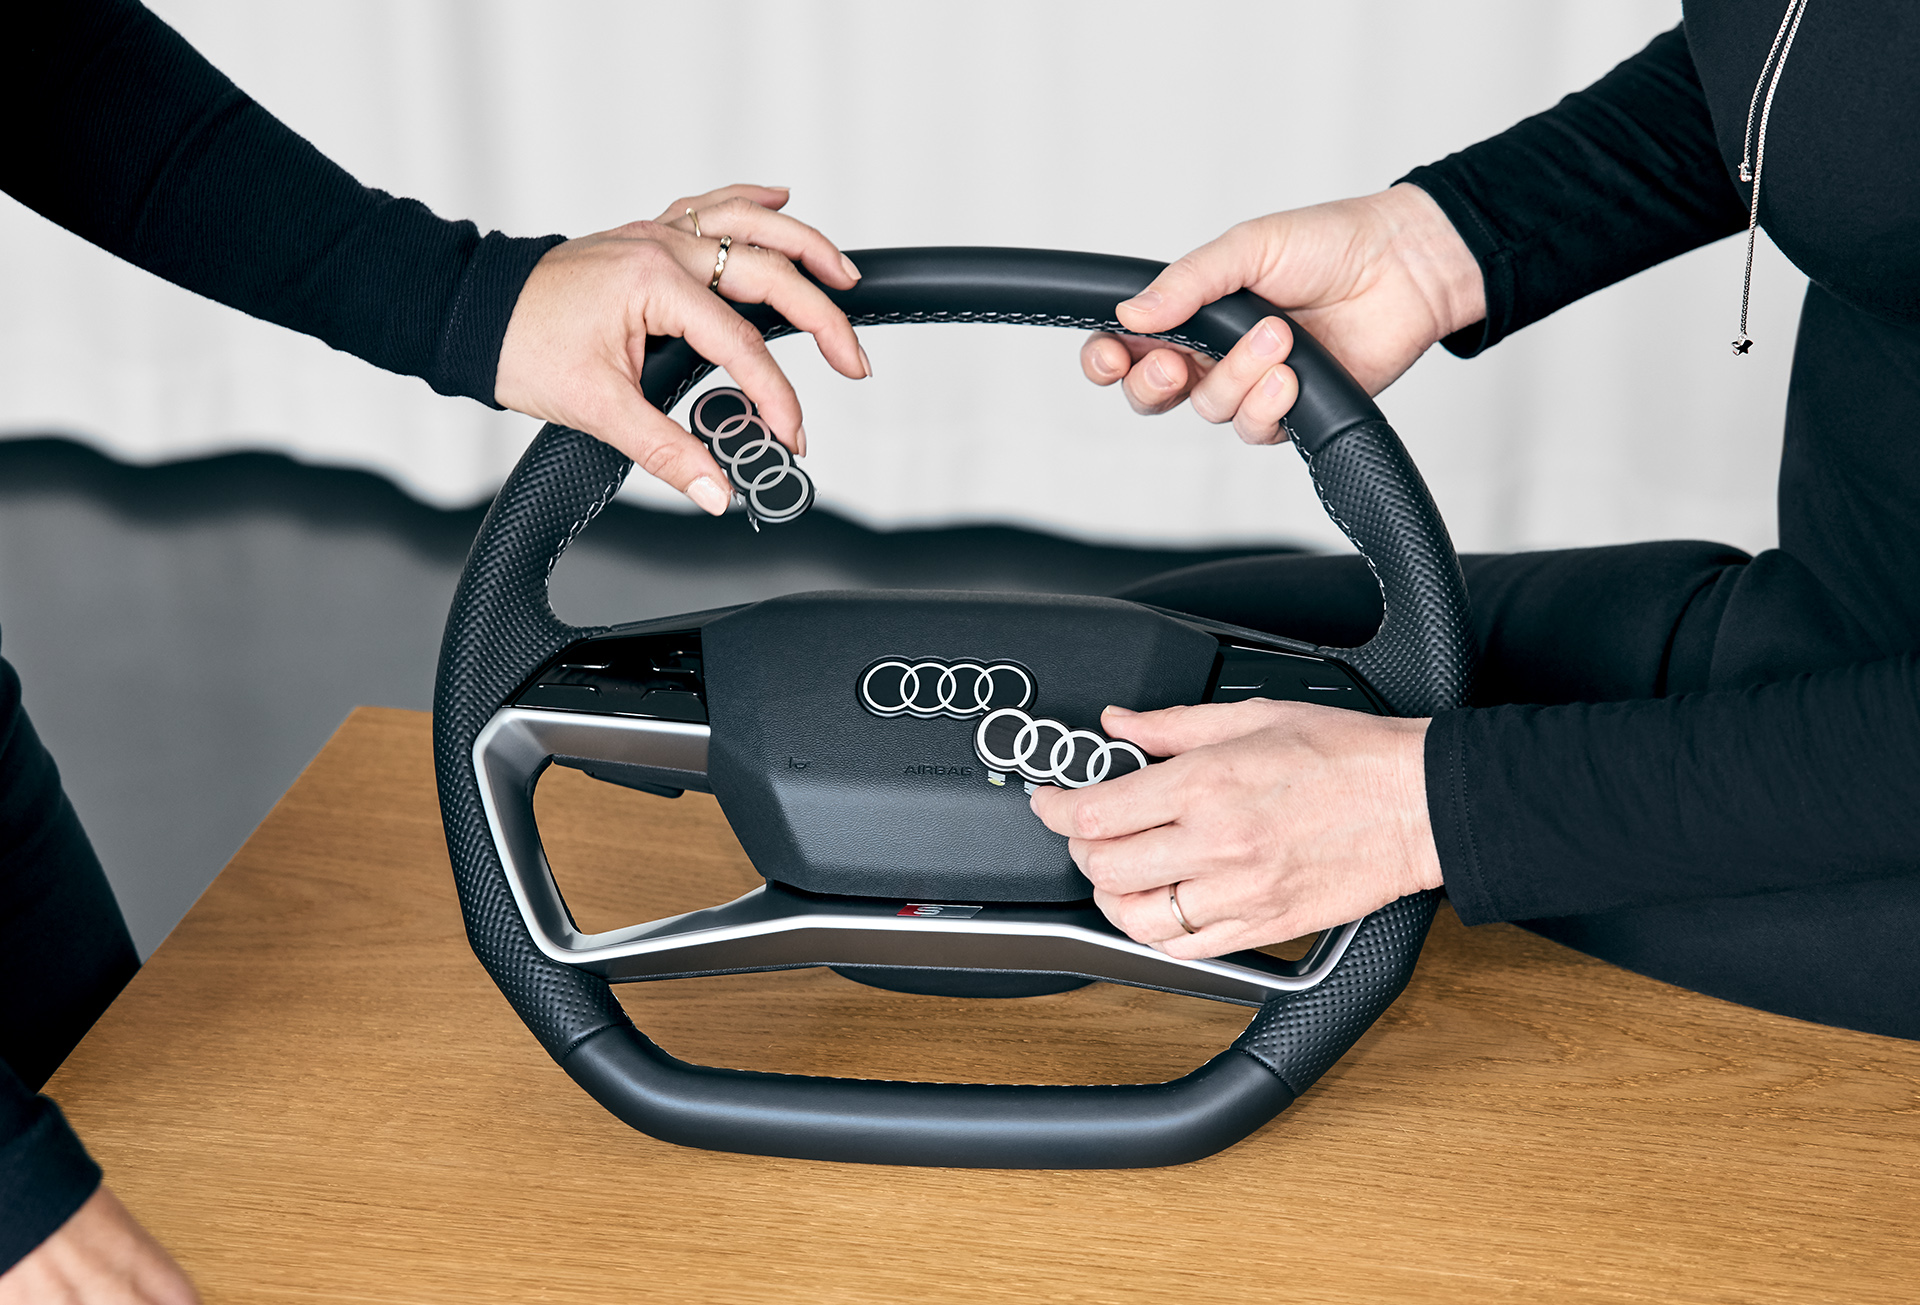 The new Audi rings using the example of the steering wheel of the Audi Q4 e-tron